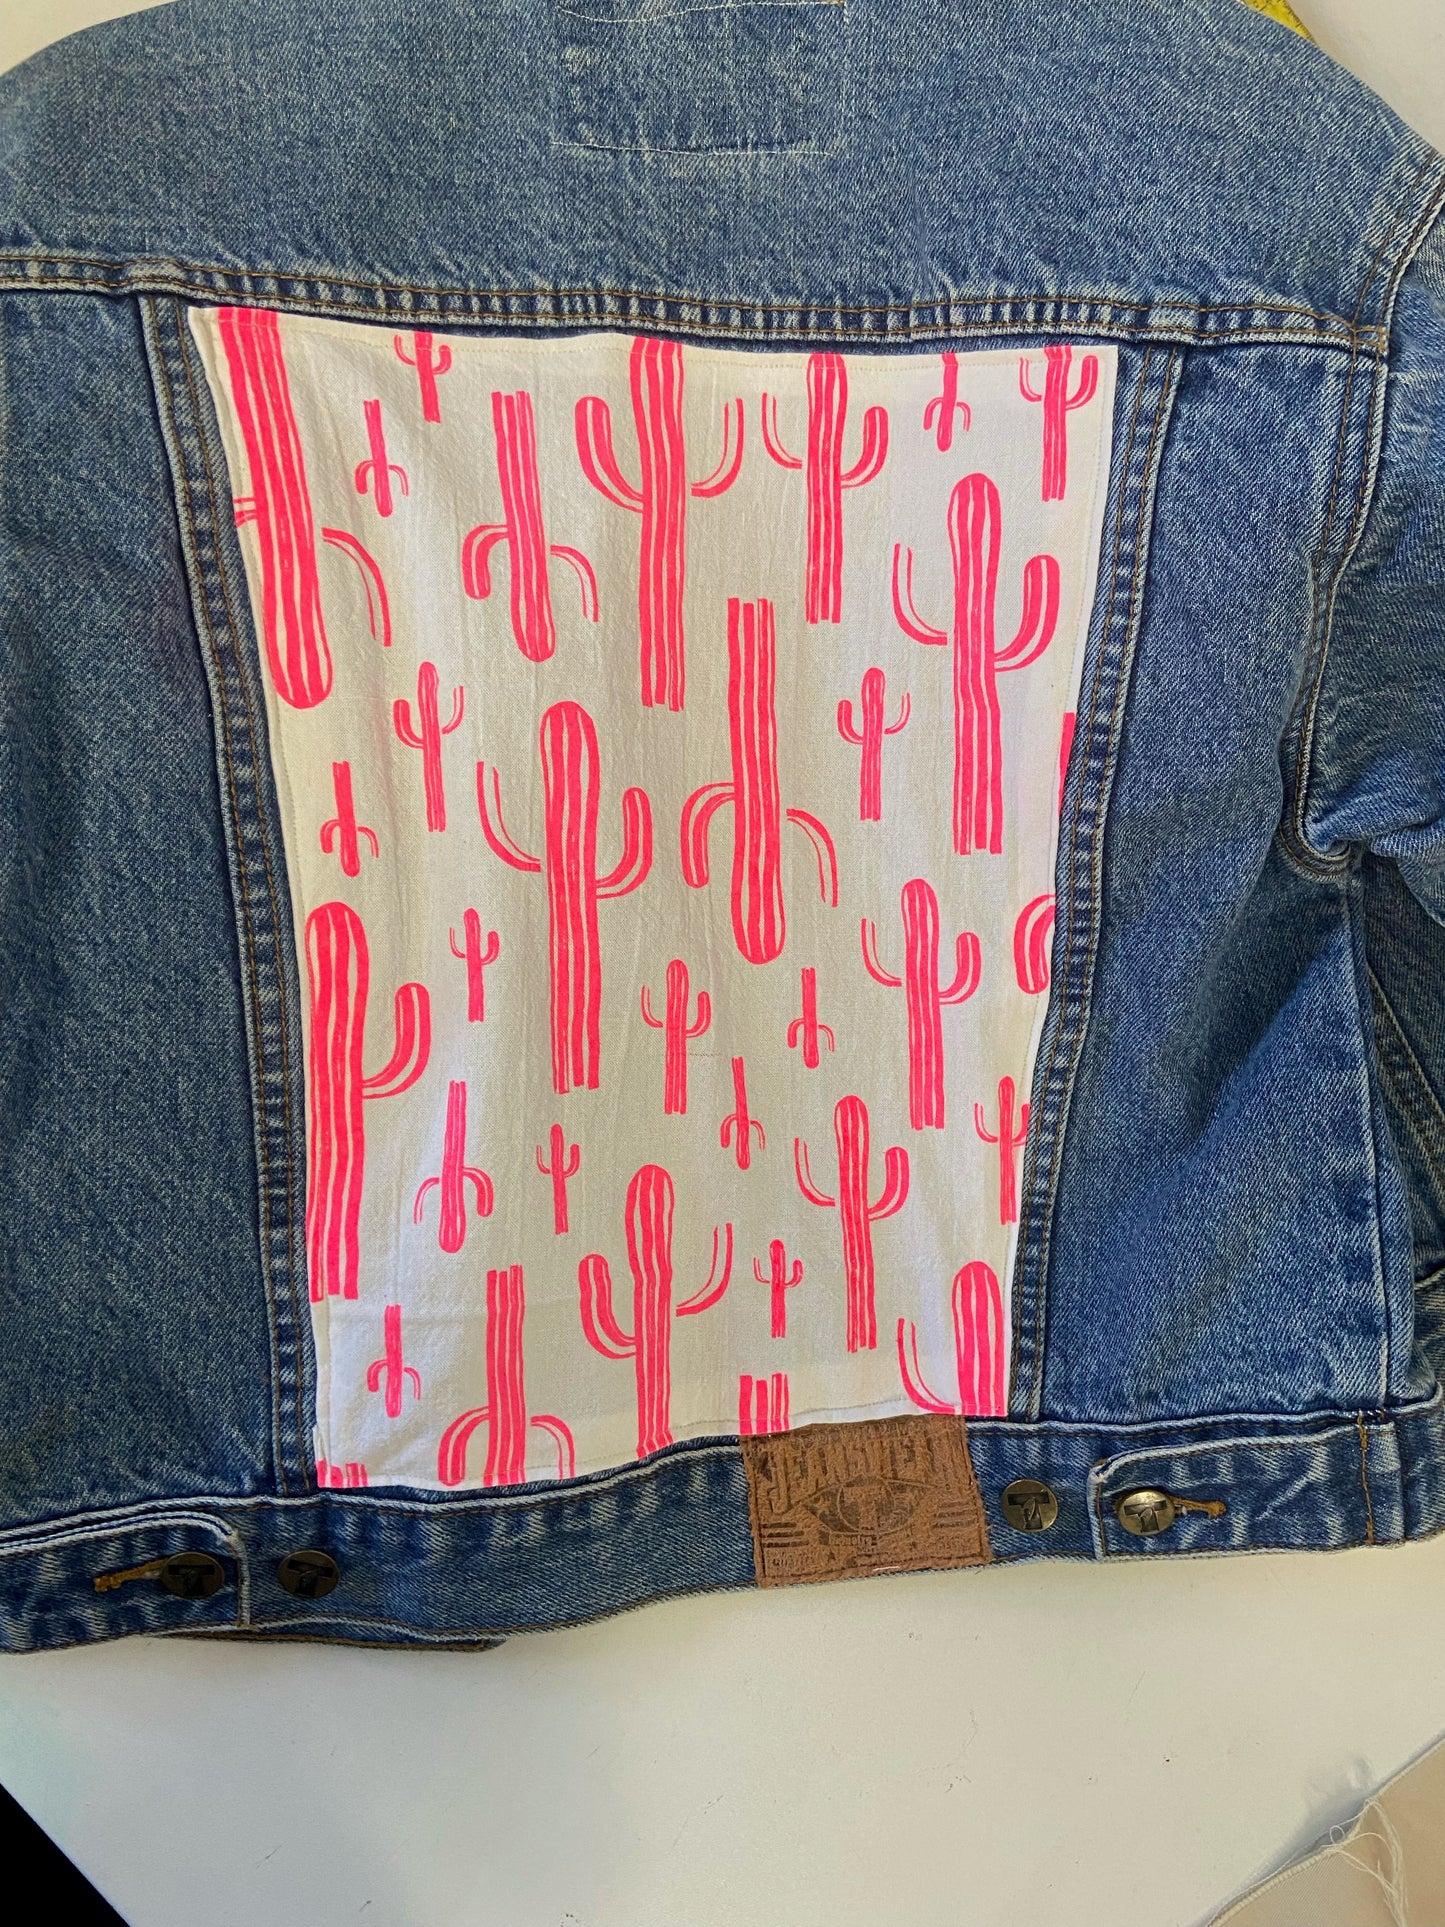 One of a Kind Upcycled KIDS Jean Jacket with Hand Printed Hot Pink Saguaro Cactus Cotton Fabric